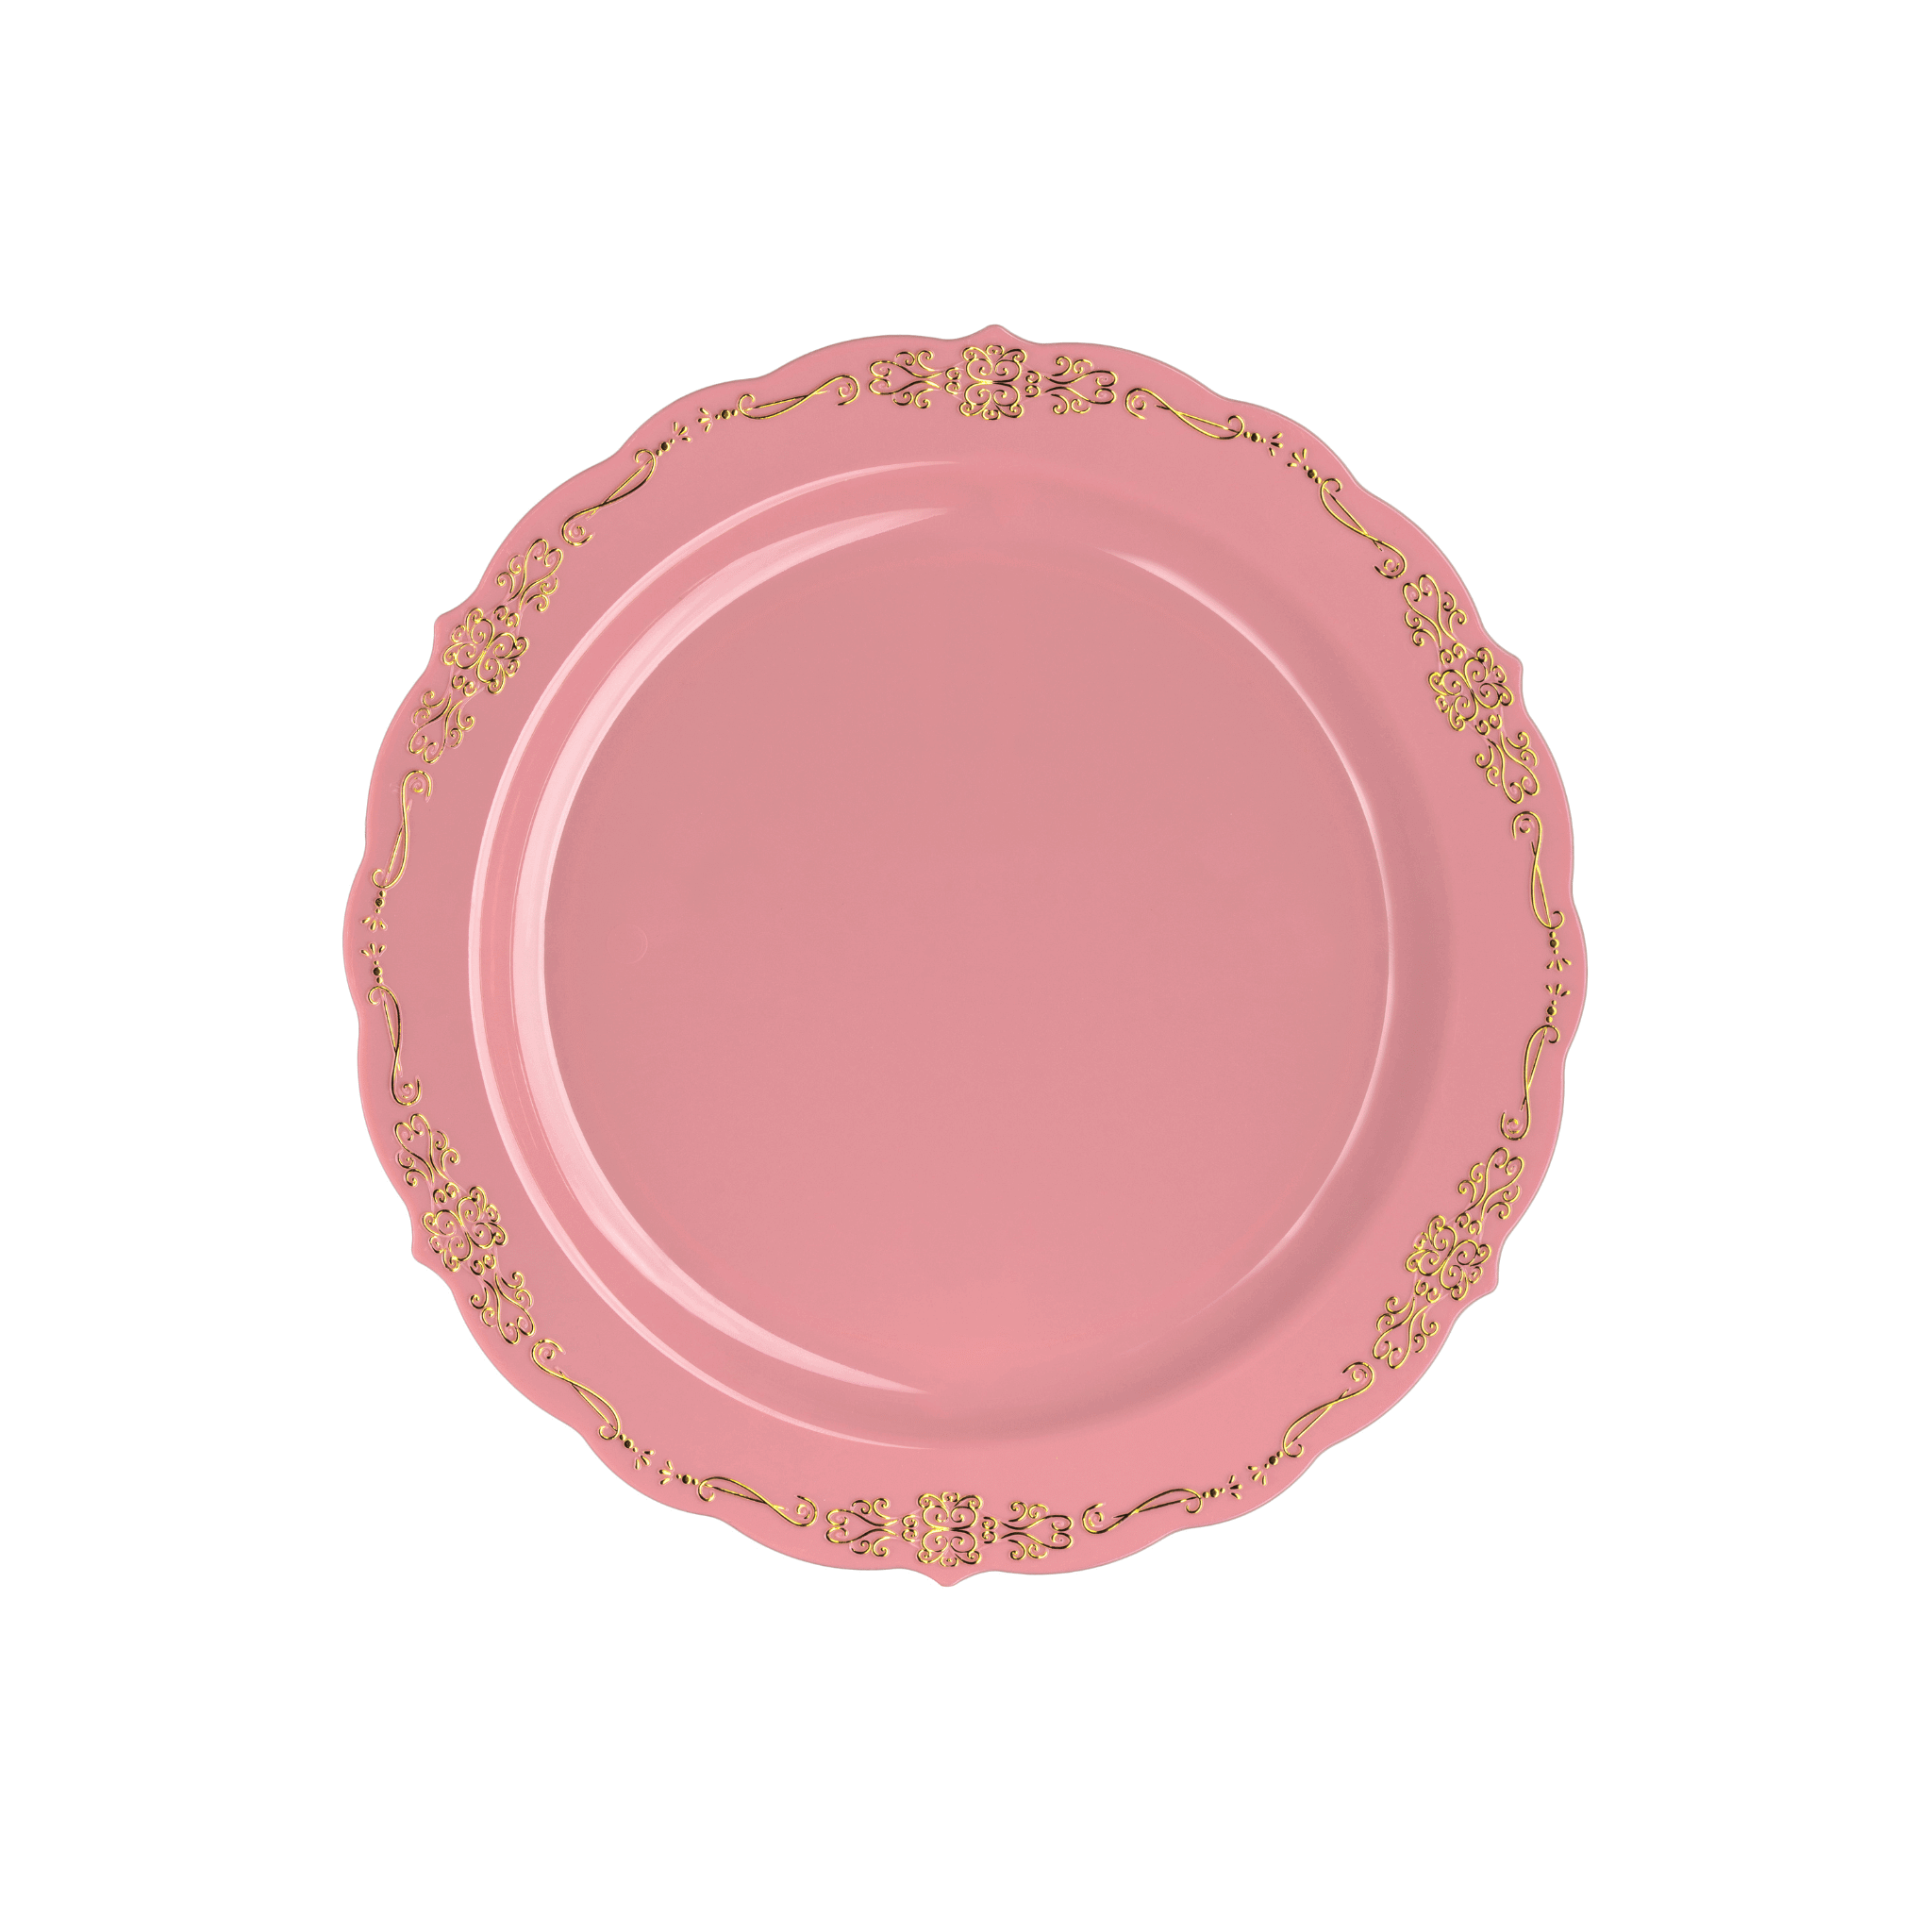 7.5" Coral / Gold Victorian Design Plastic Plates (120 Count) - Yom Tov Settings